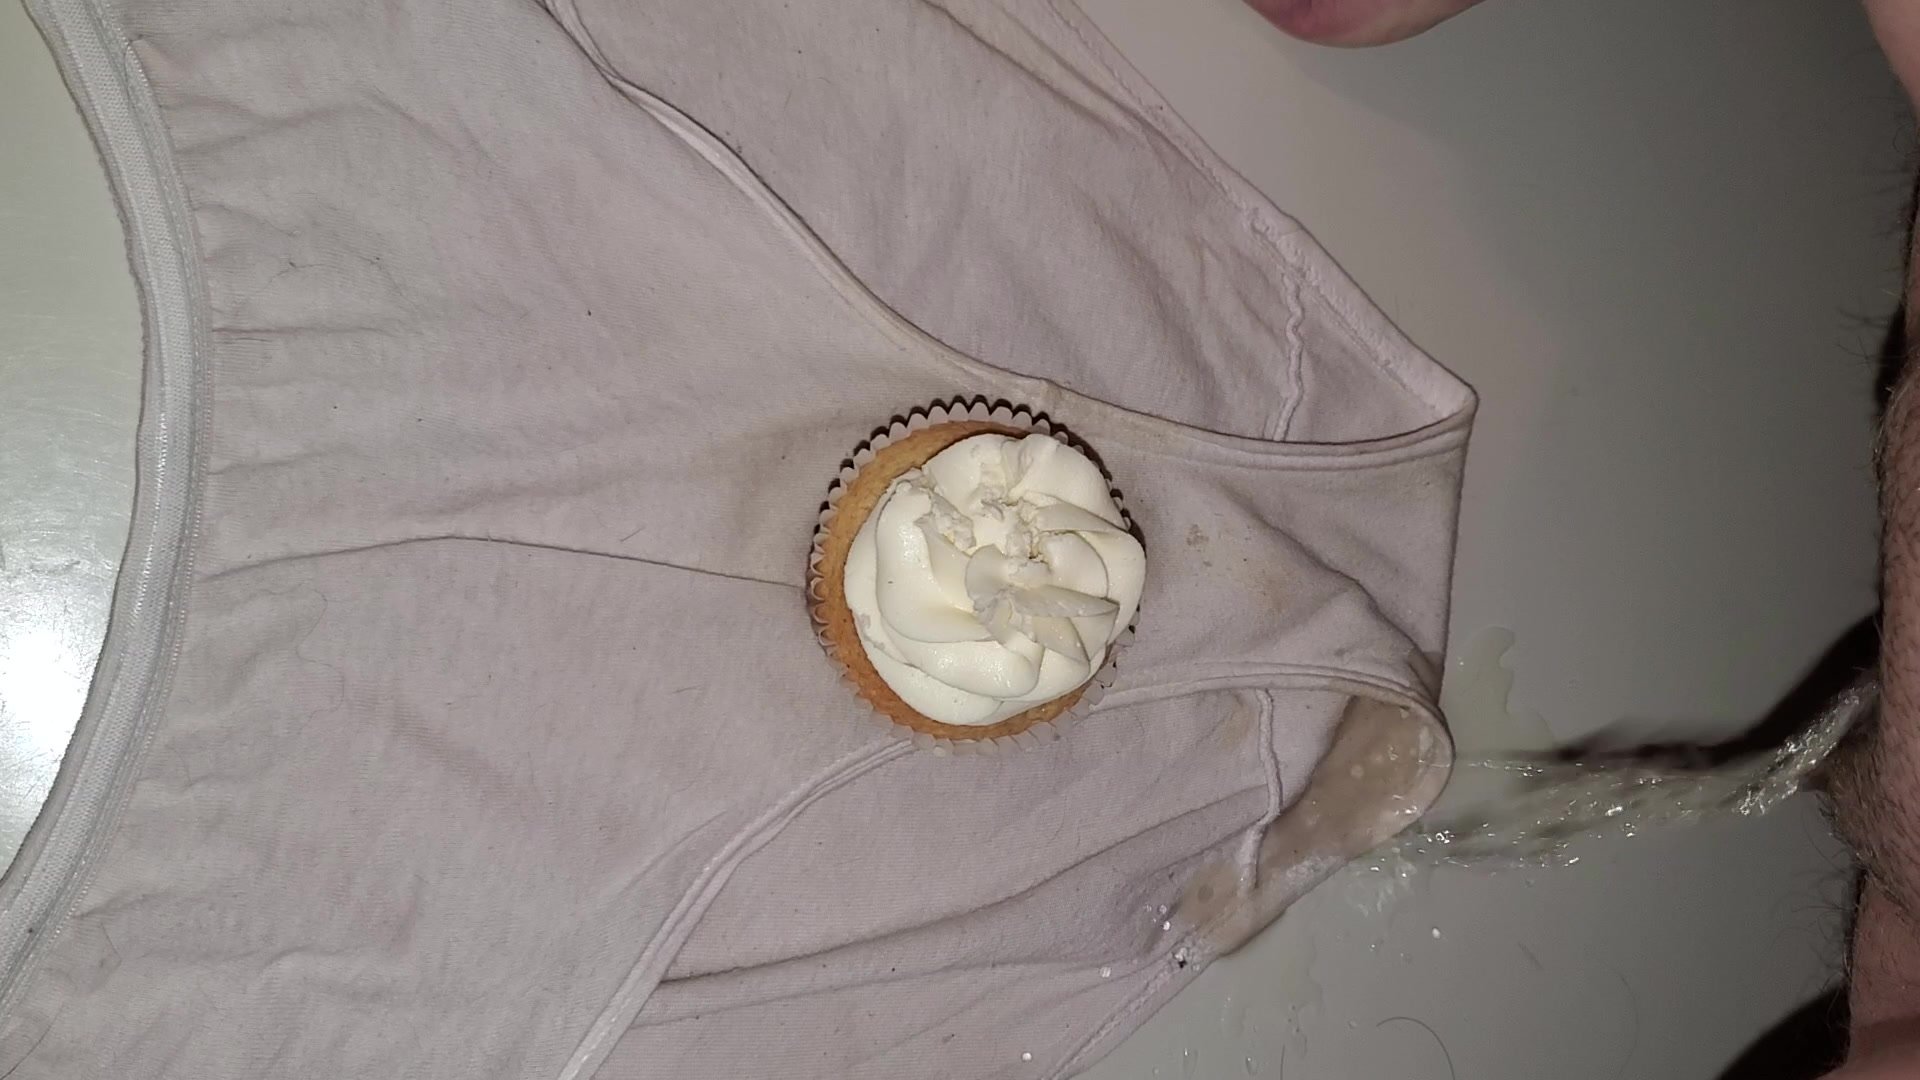 Pissing on a cupcake and underwear